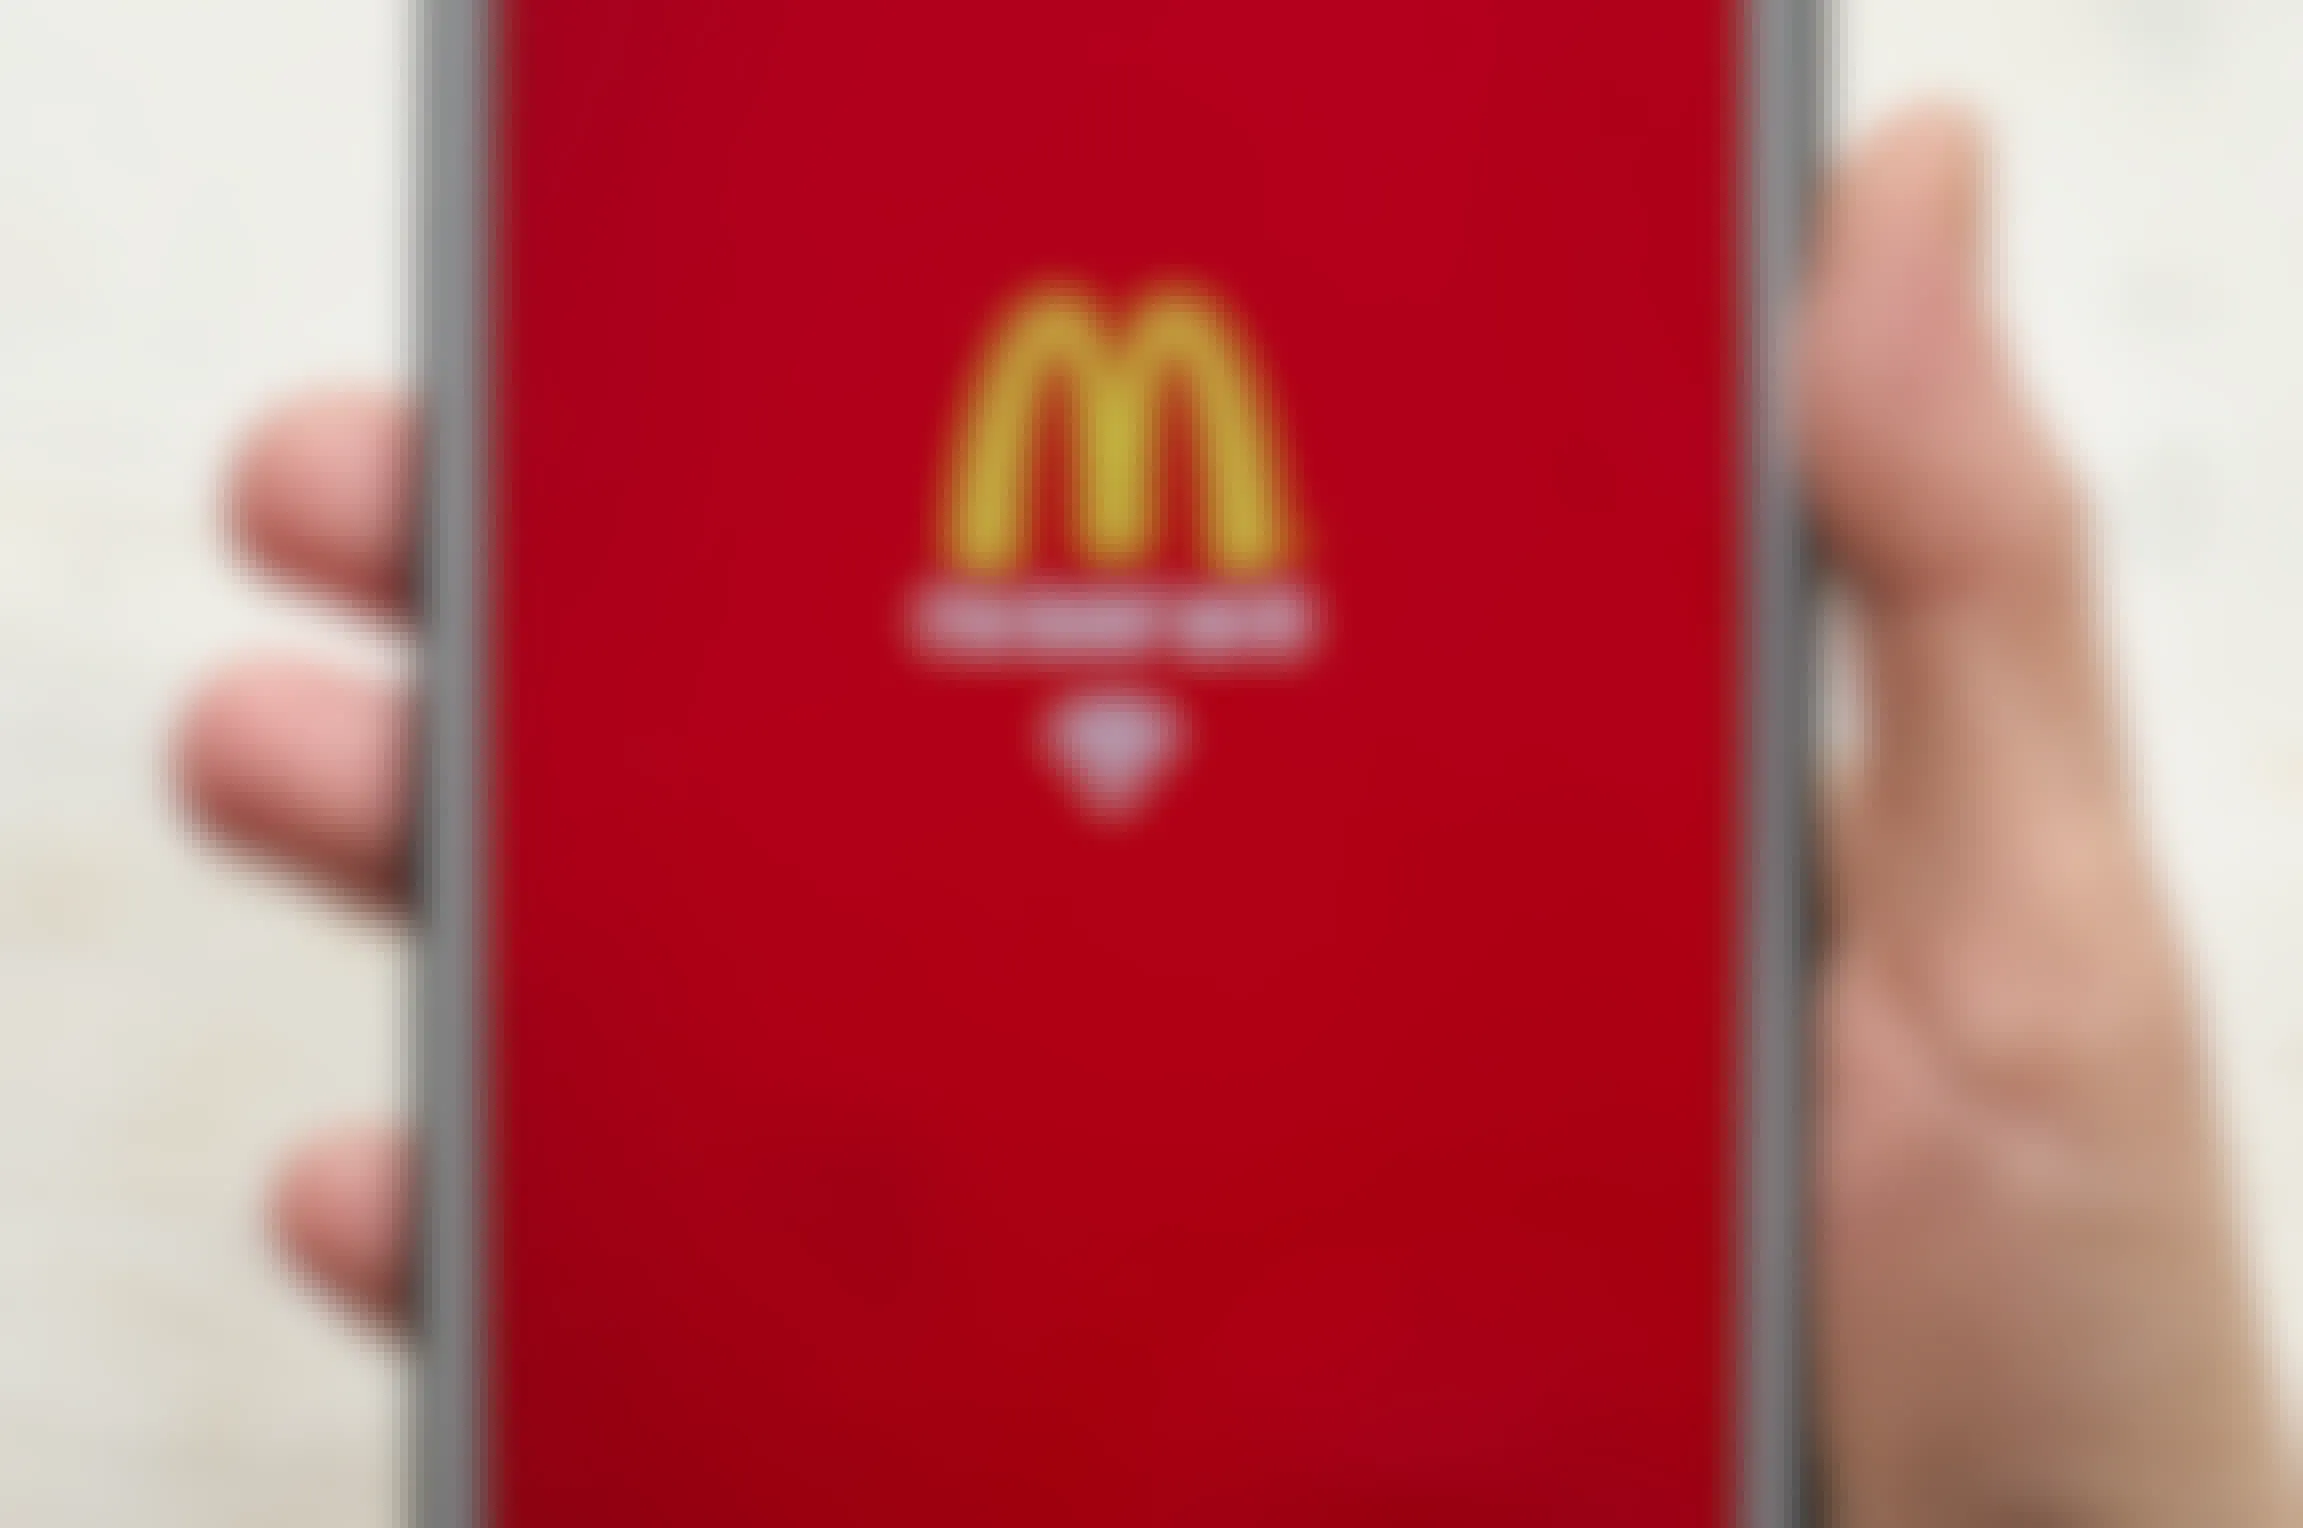 A person's hand holding a phone with the McDonald's app open showing the golden arches logo and reads "I'm lovin' wi-fi